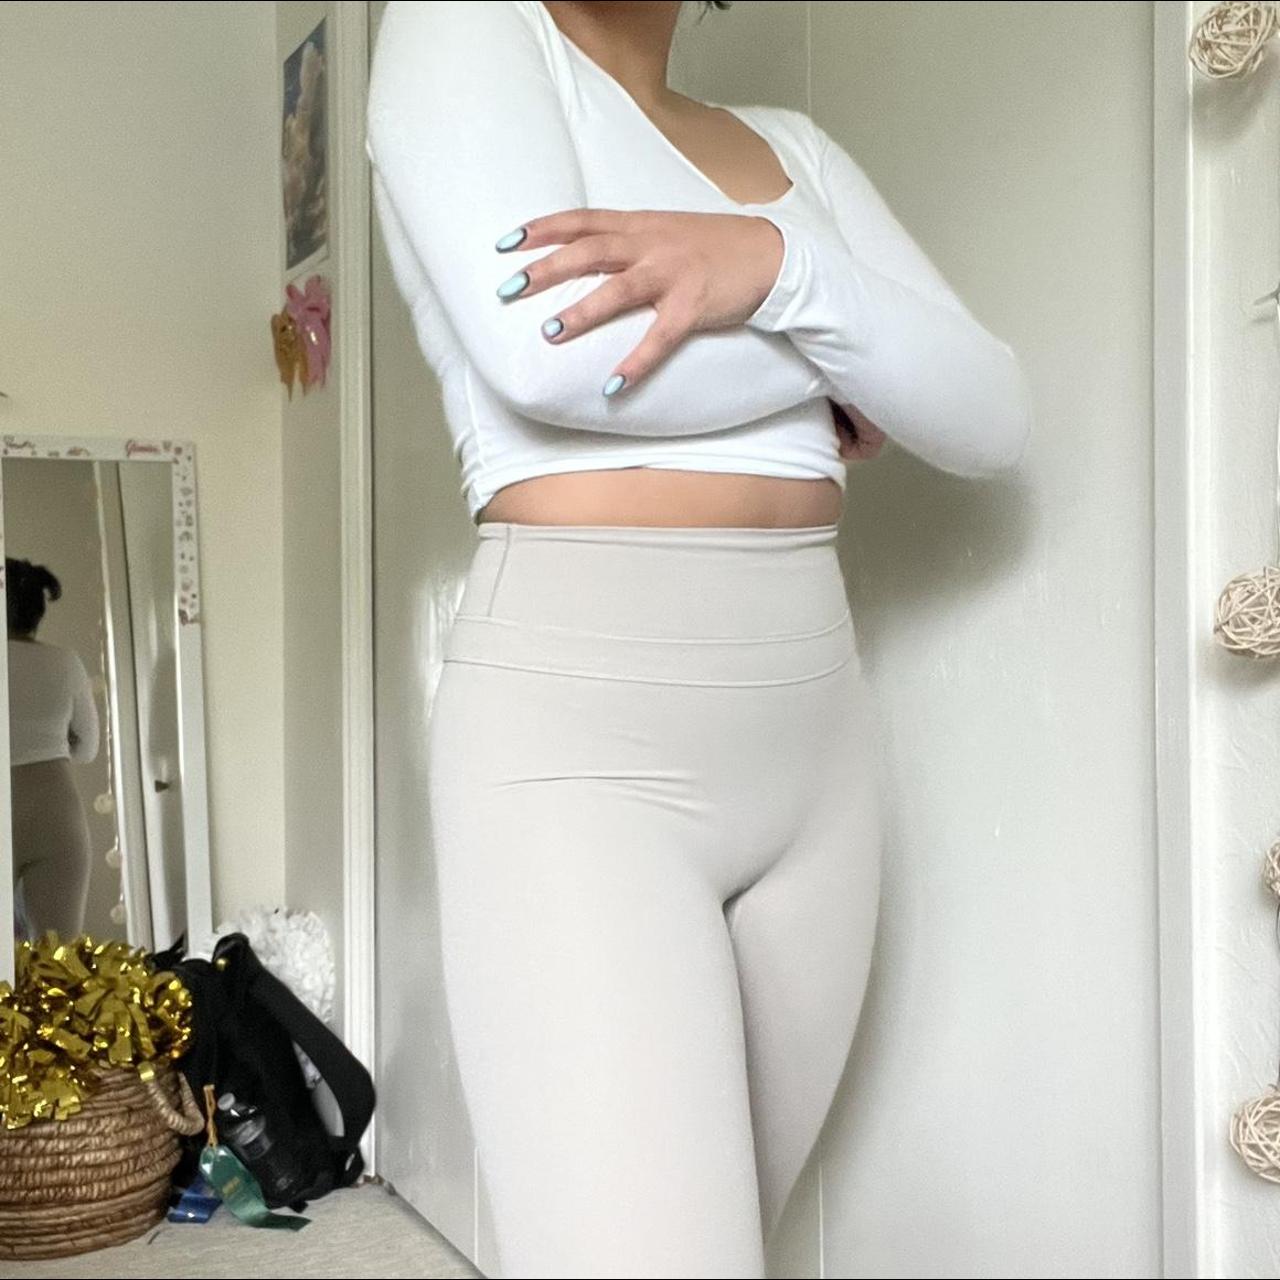 Whitney Simmons' New Gymshark Collection Is Both Adorable and